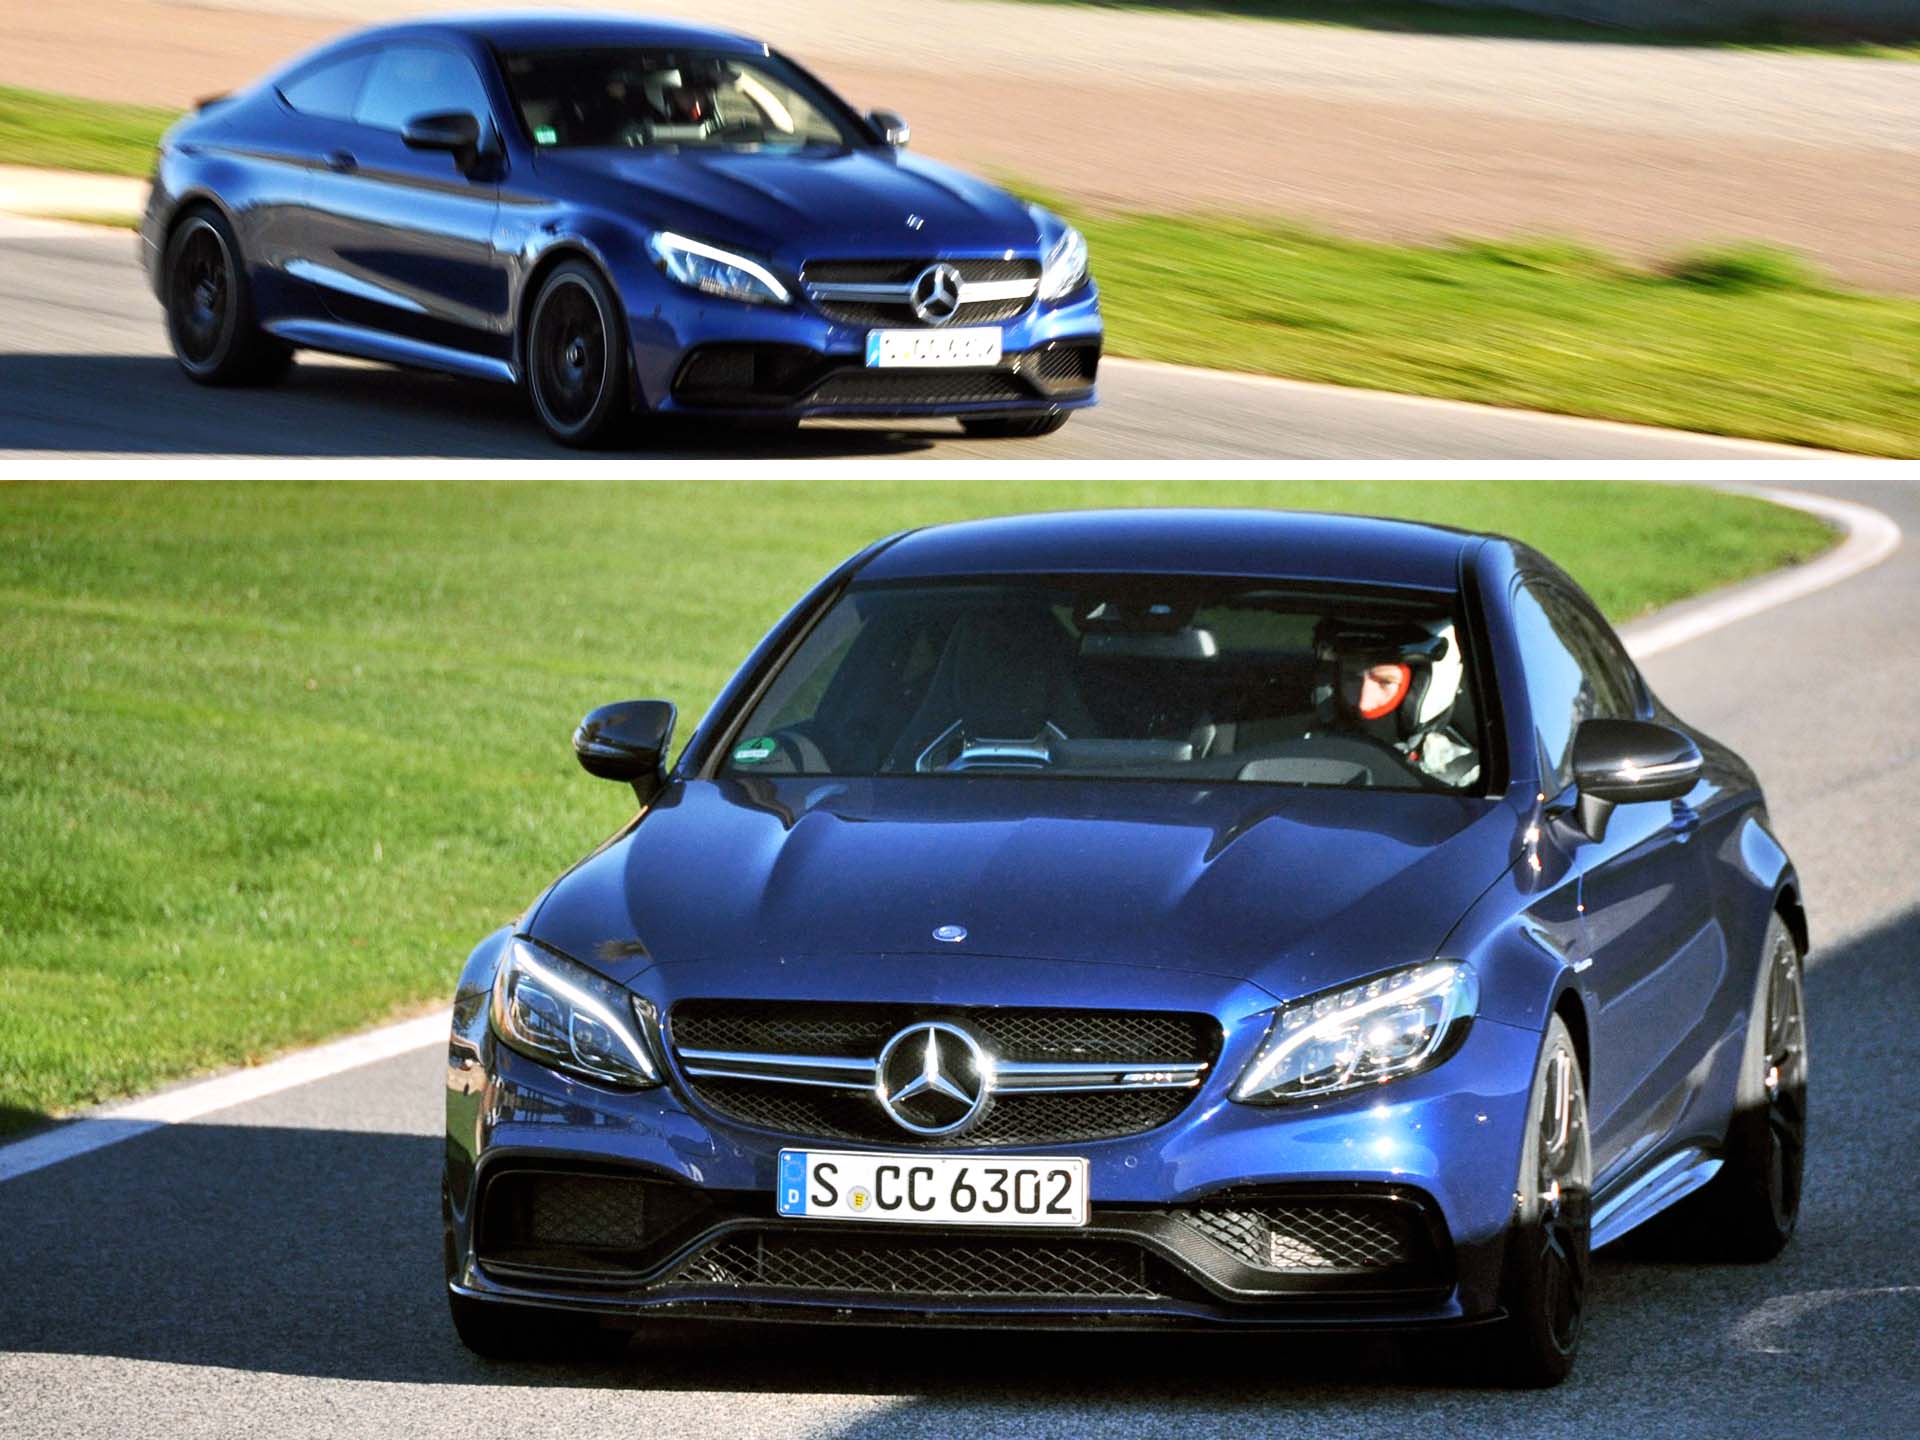 We had a chance to experience that at the Circuito Ascari, a racetrack about 100 km from Malaga. This technical track just over five kilometres in length gives you a great opportunity to experience the C 63's awesome acceleration, cornering and braking.